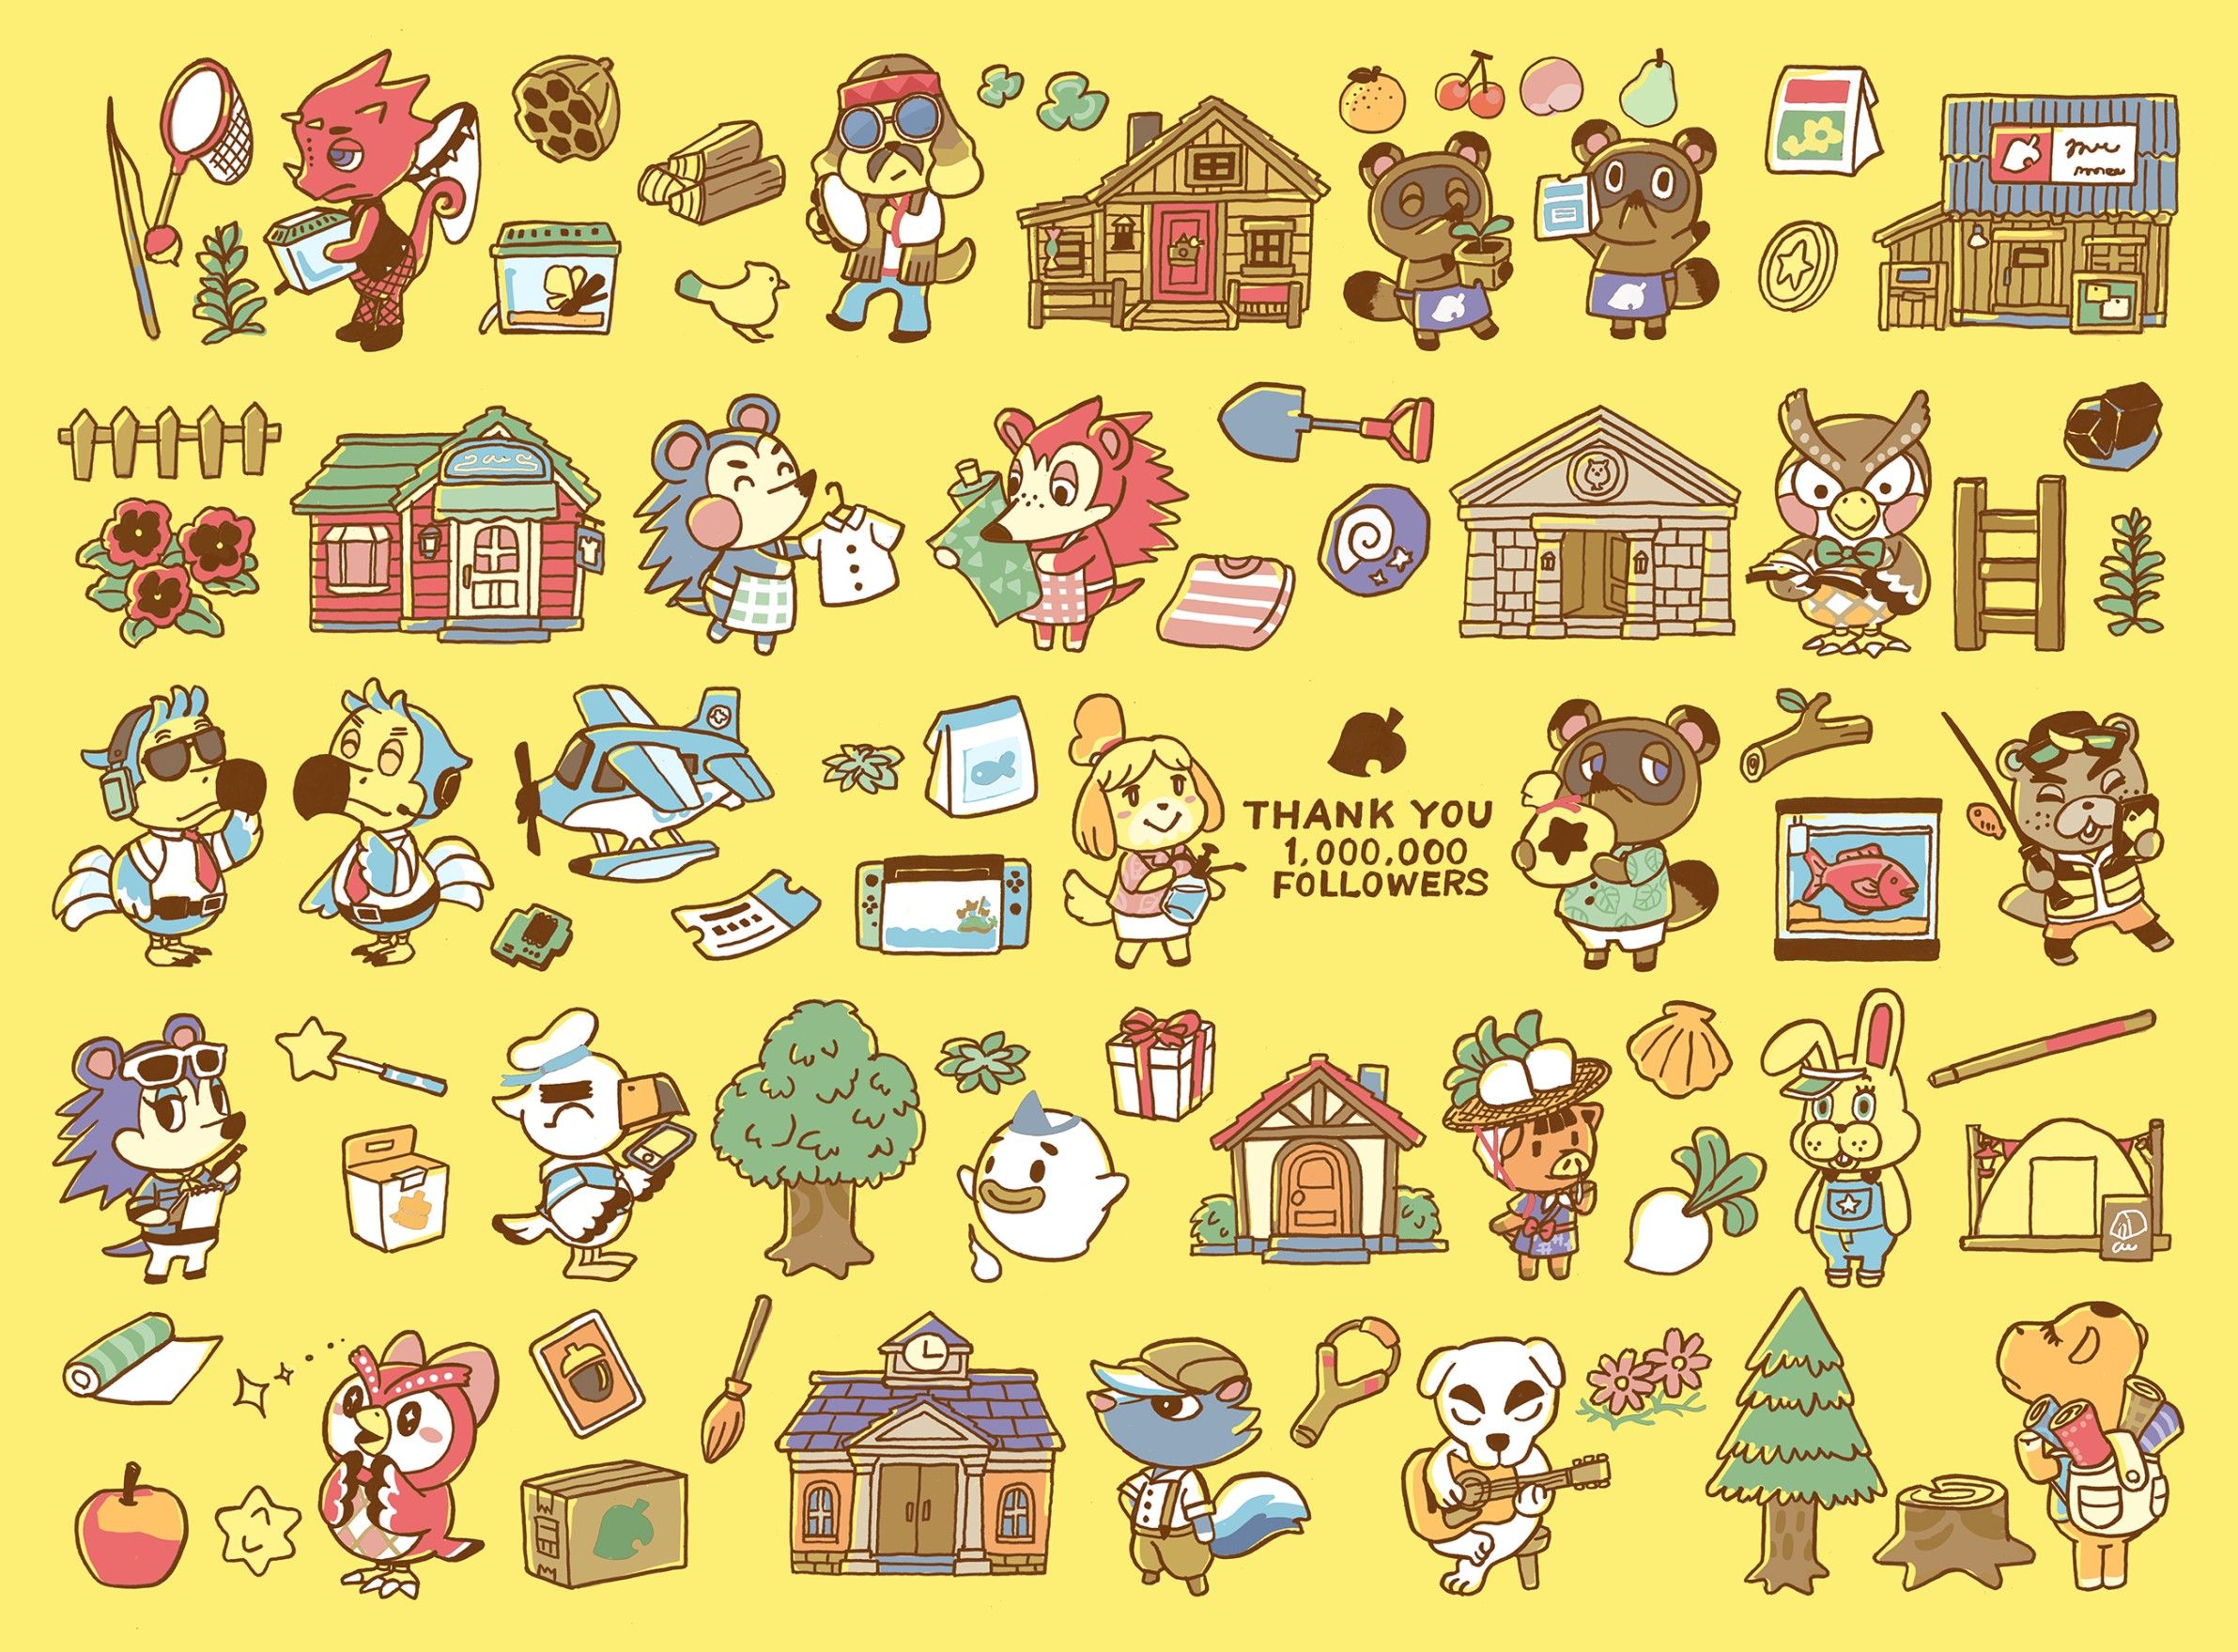 A collection of stickers featuring various animals - Animal Crossing